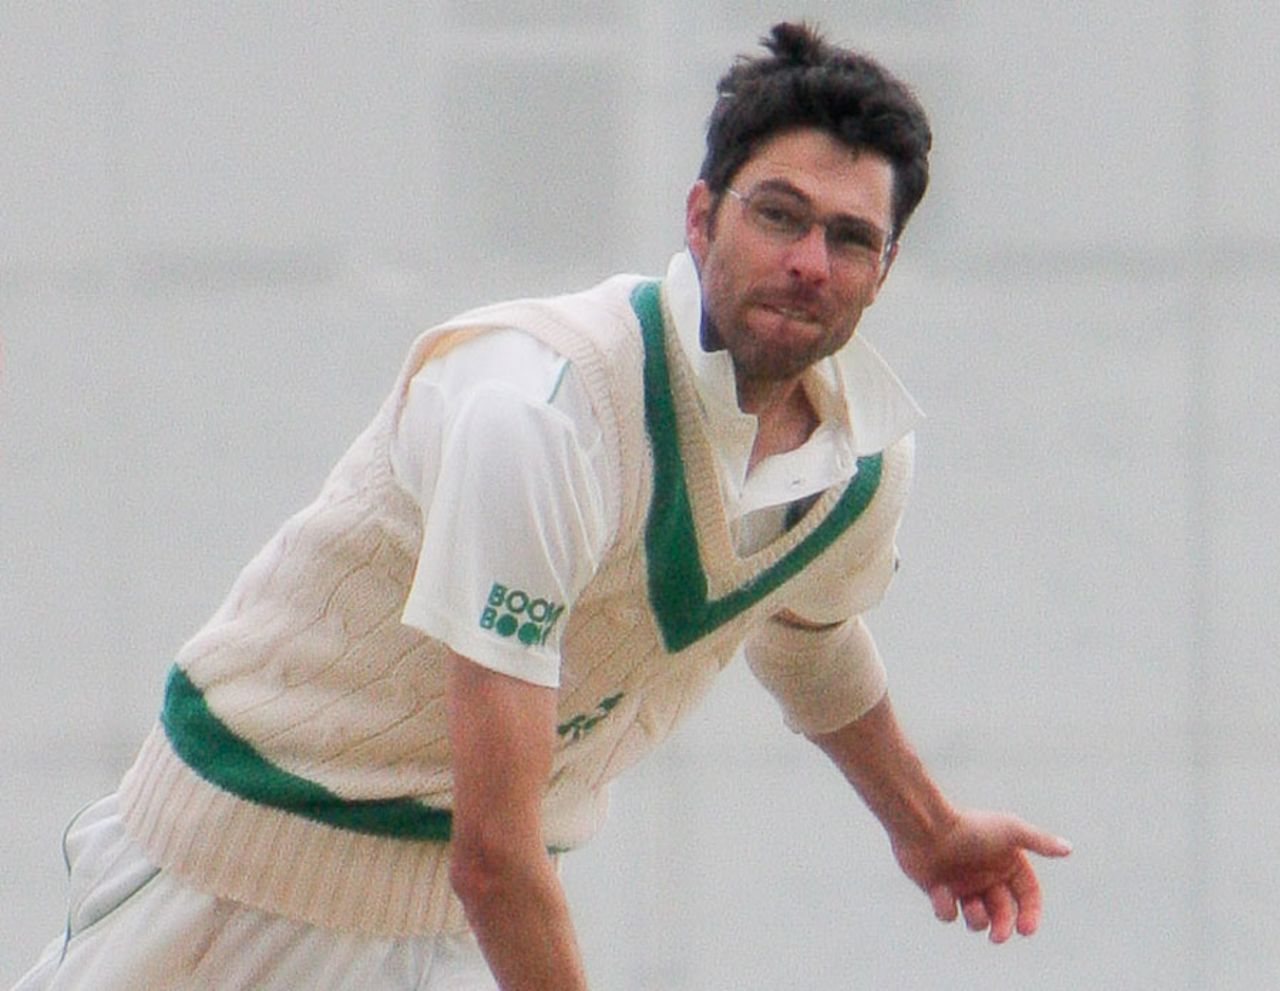 Albert Van Der Merwe finished with eight wickets in the game, Ireland v Canada, Intercontinental Cup, 2nd day, Dublin, September 14, 2011